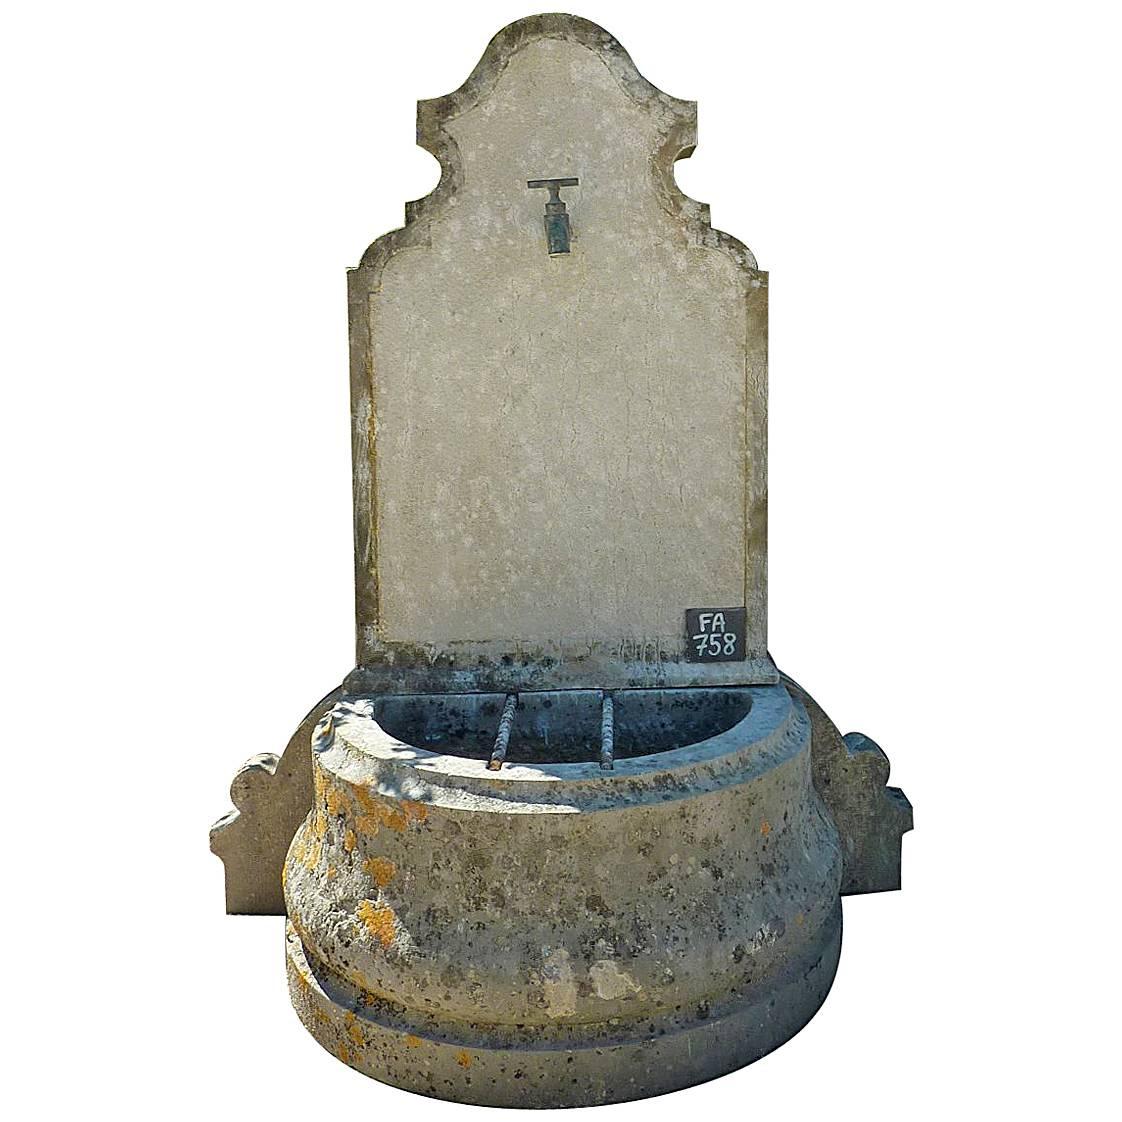 Wonderful Antique Small Garden Stone Fountain with Ancient Faucet and Metal Bars